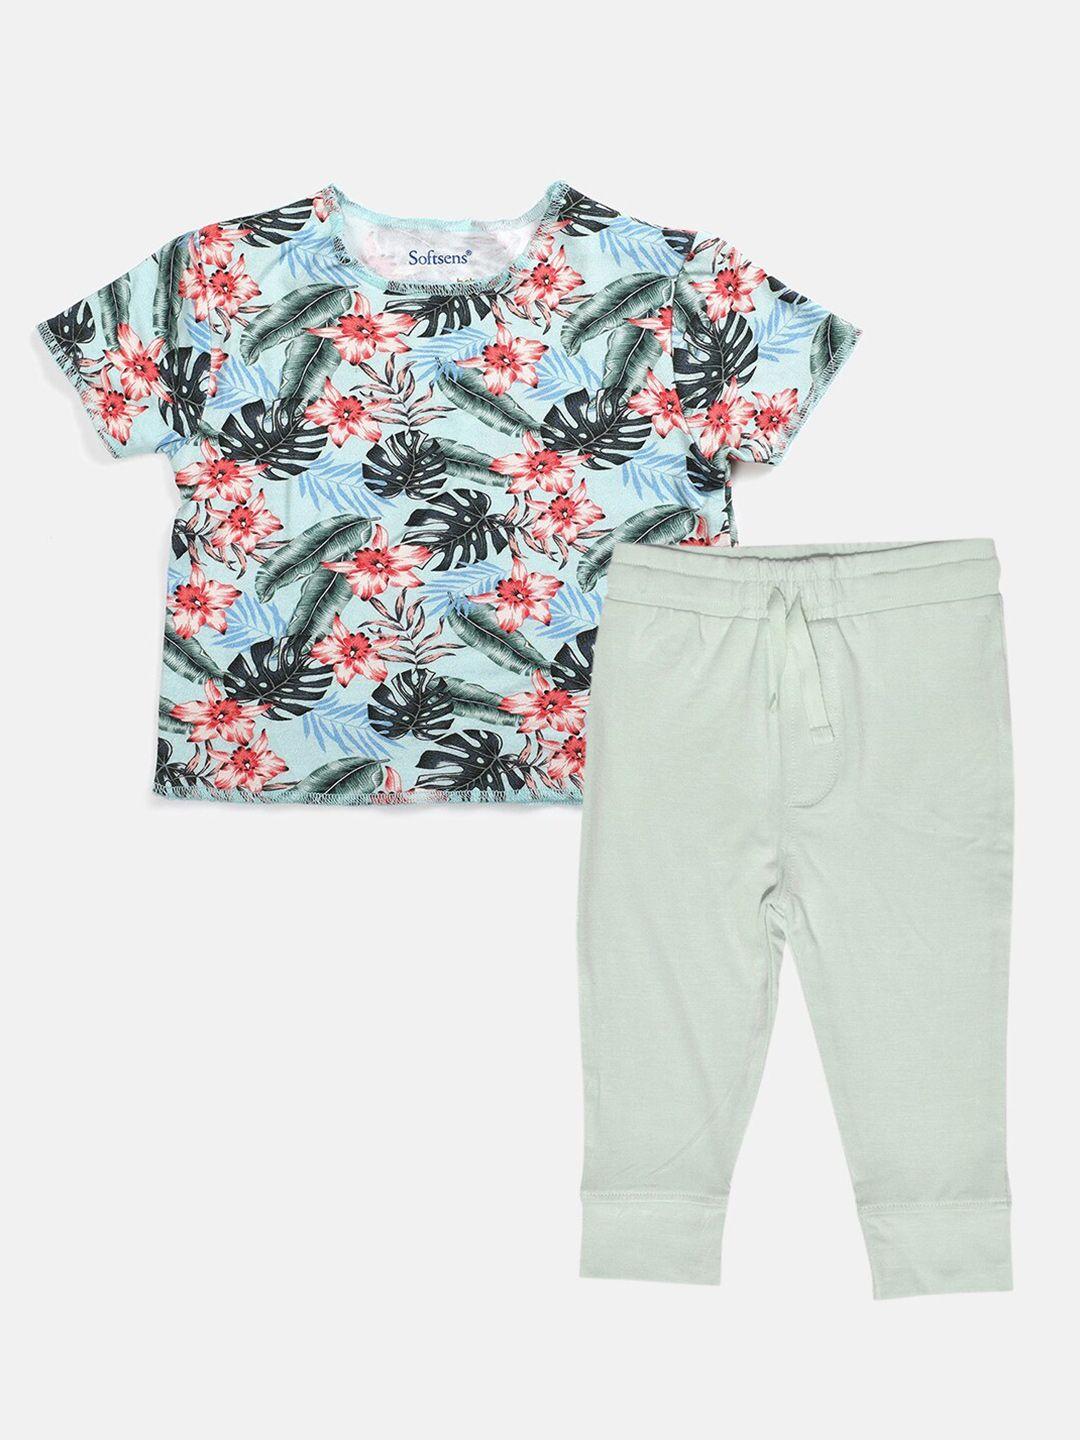 softsens boys sea green & red printed bamboo t-shirt with trousers